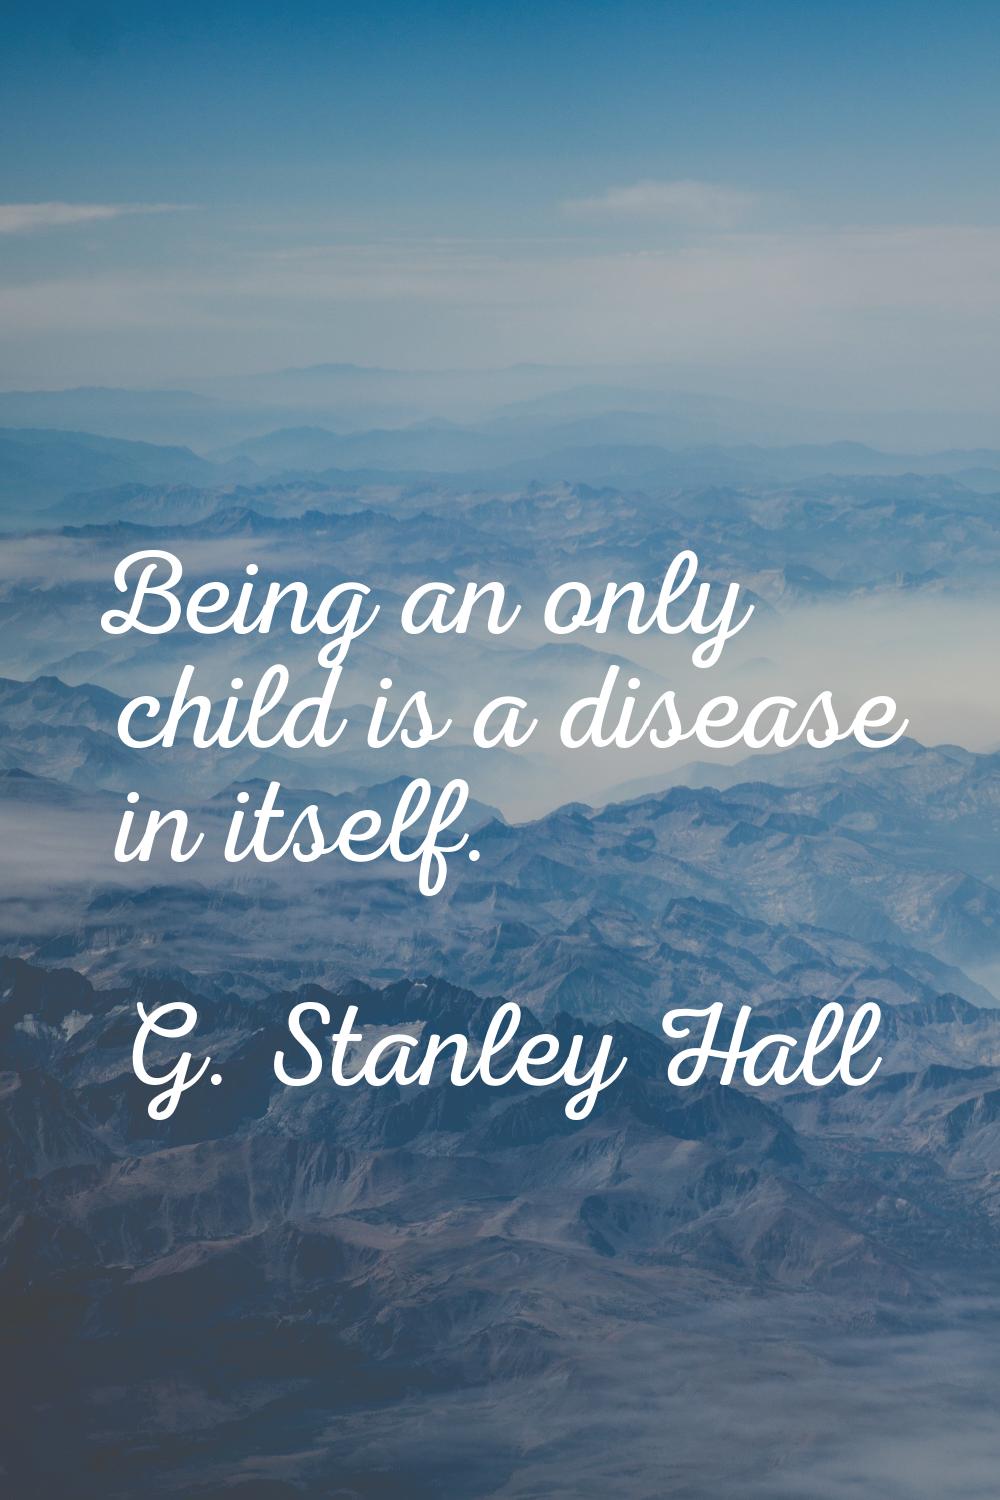 Being an only child is a disease in itself.